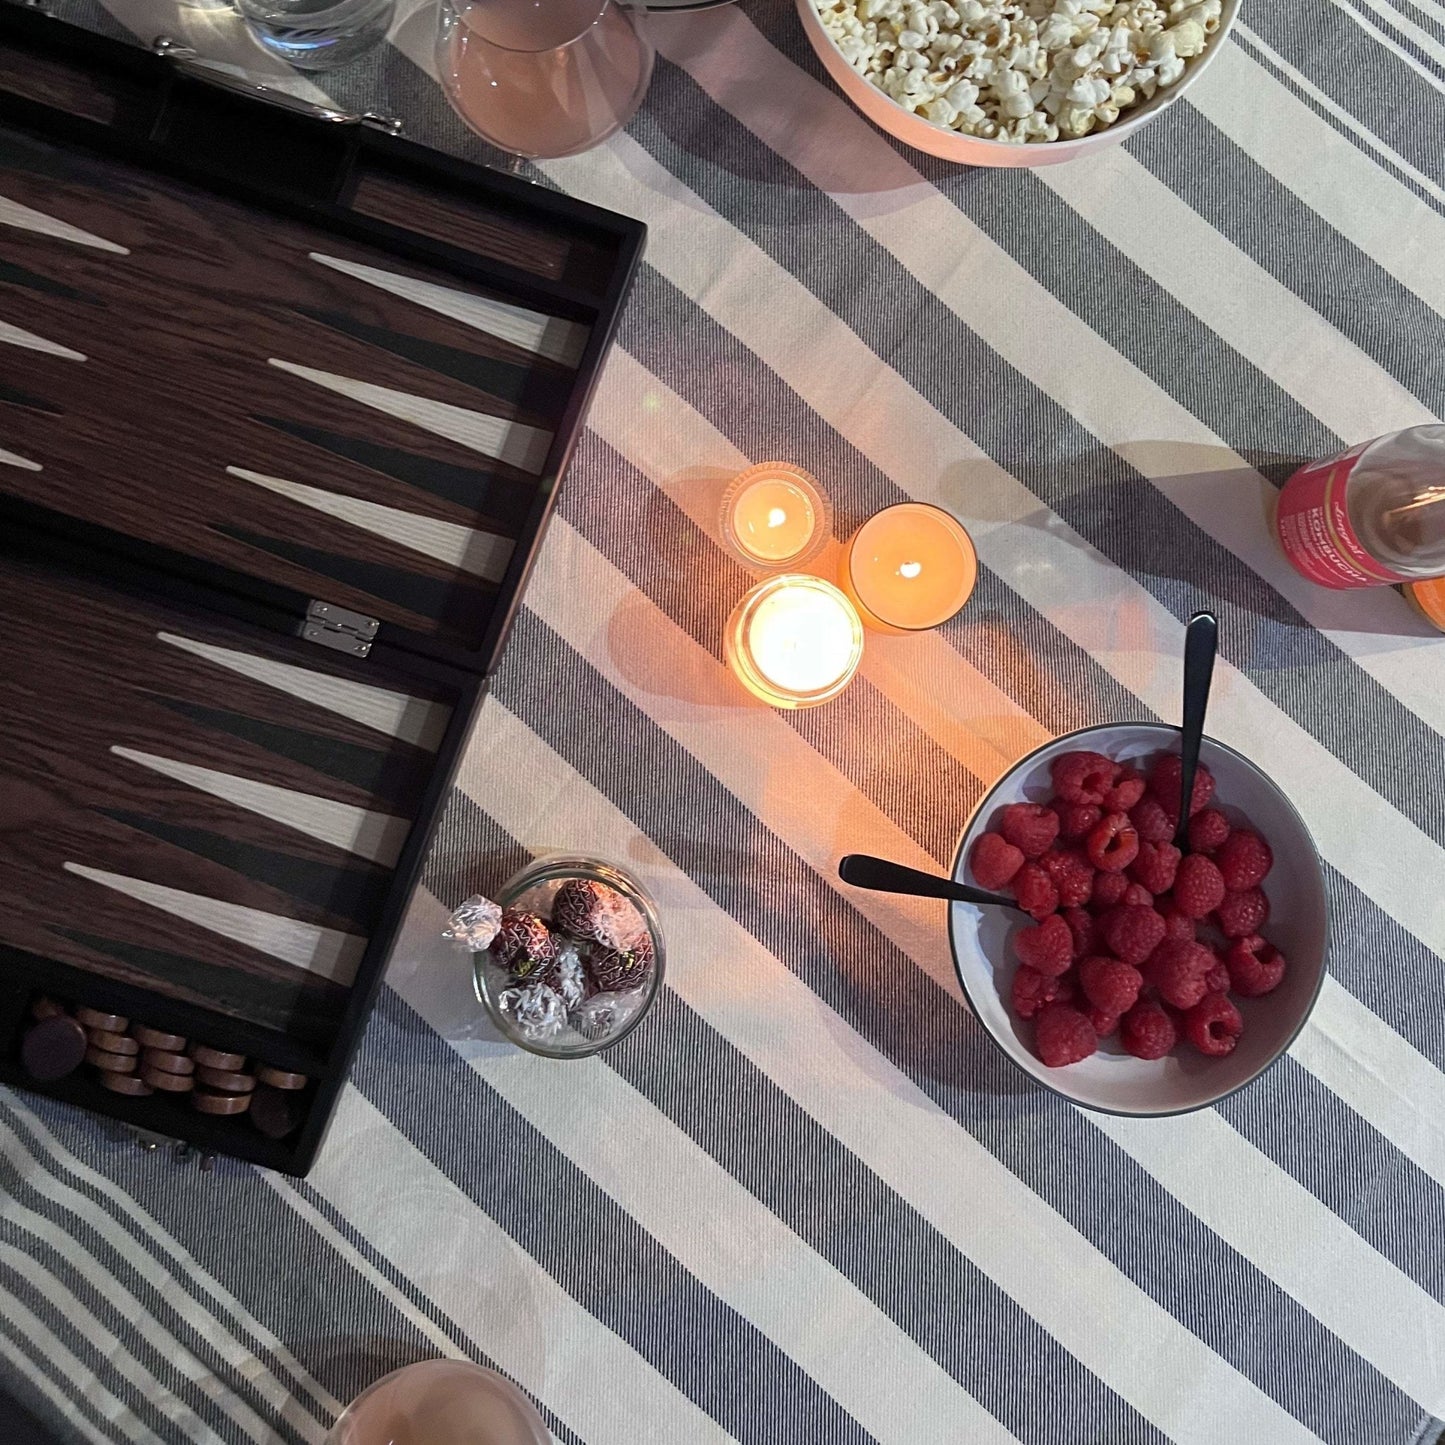 romantic games and snacks set up with a SENDE black turkish towel as the table cloth - SENDE peştemal duo set - sende self-care essentials